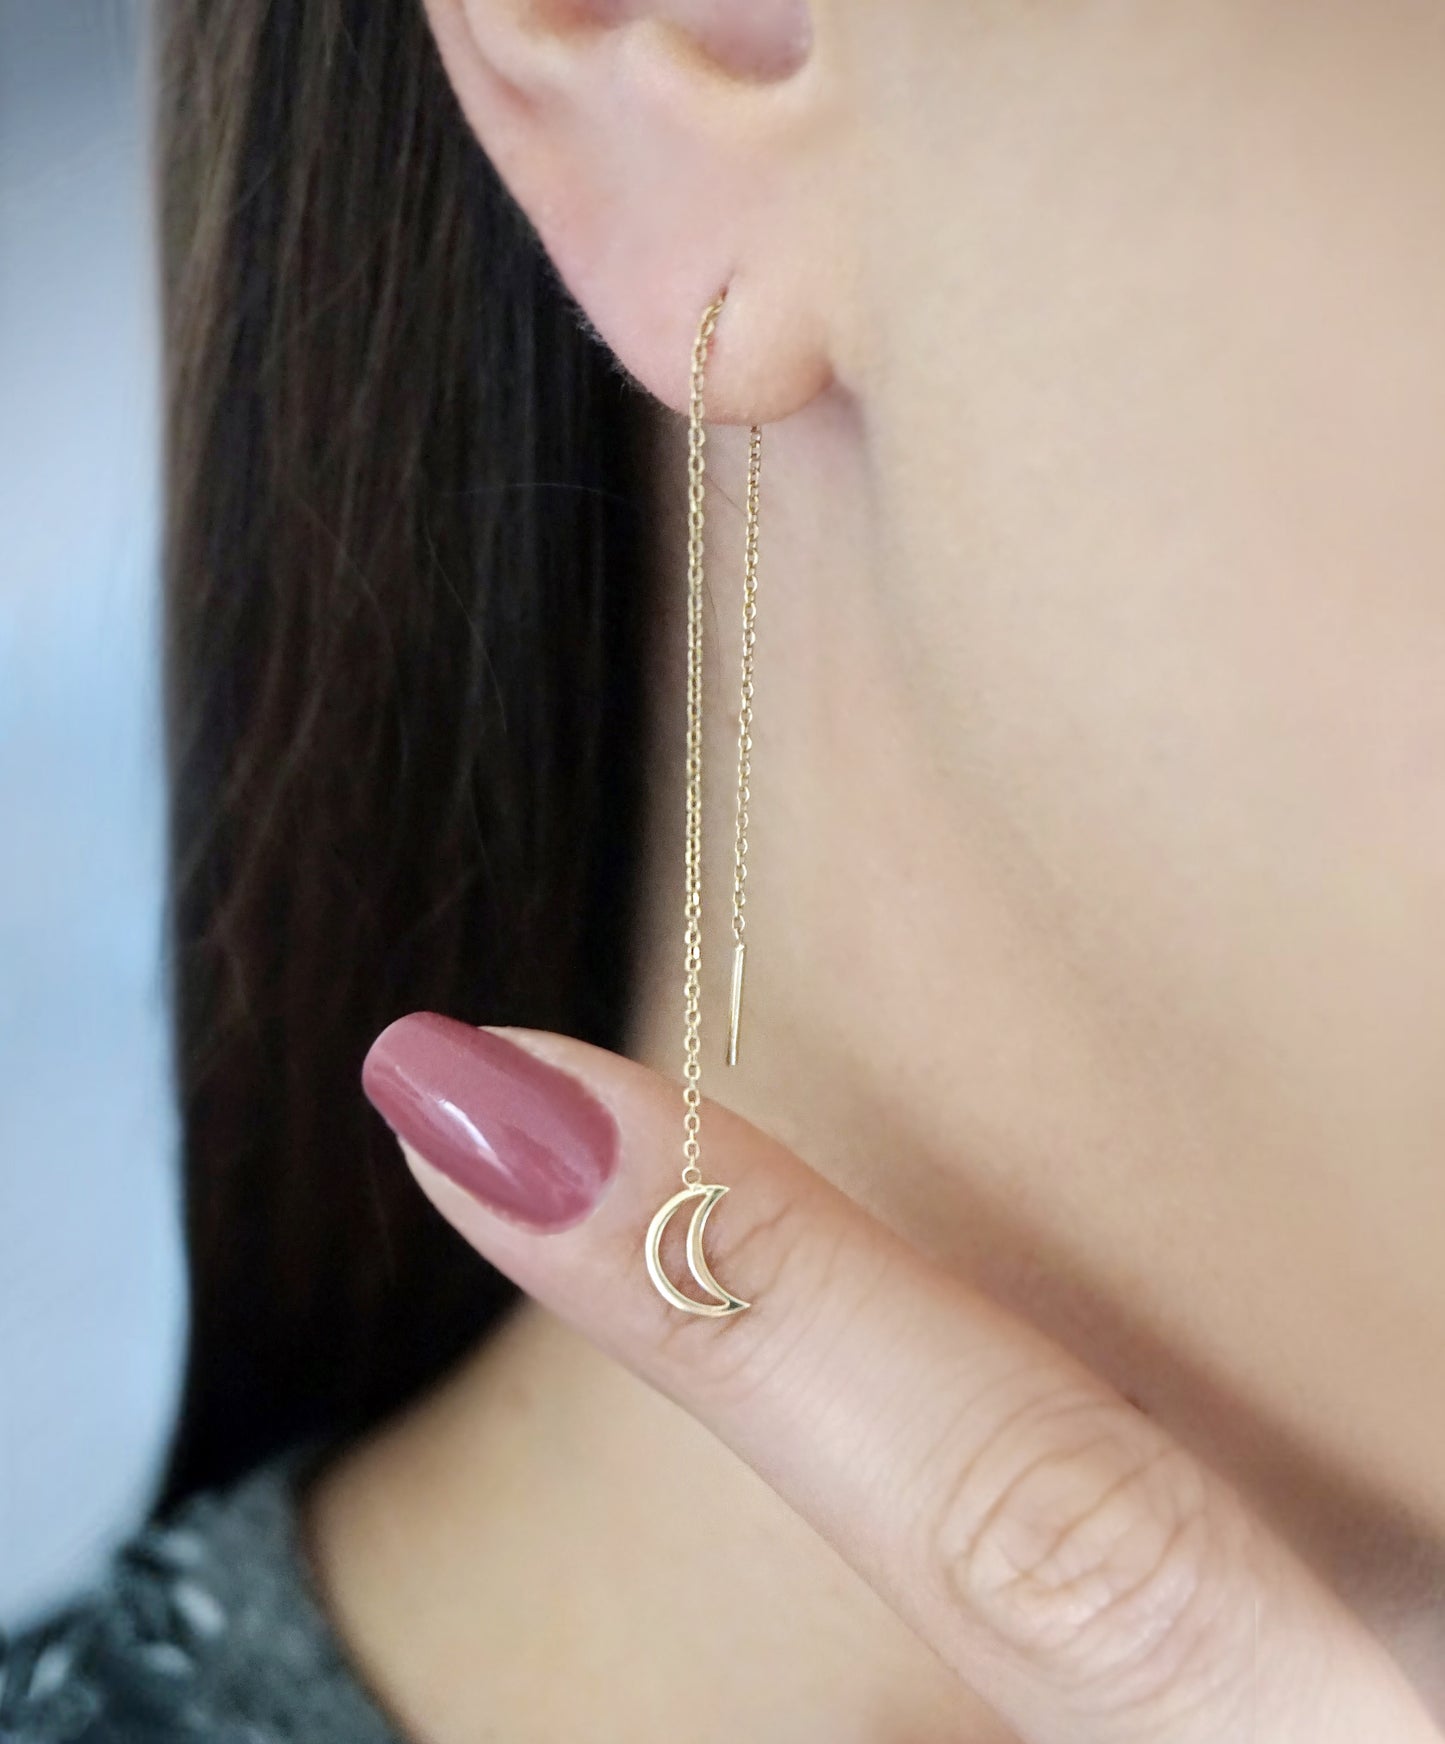 Solid Gold Threader Earrings with a Tiny Crescent Moon